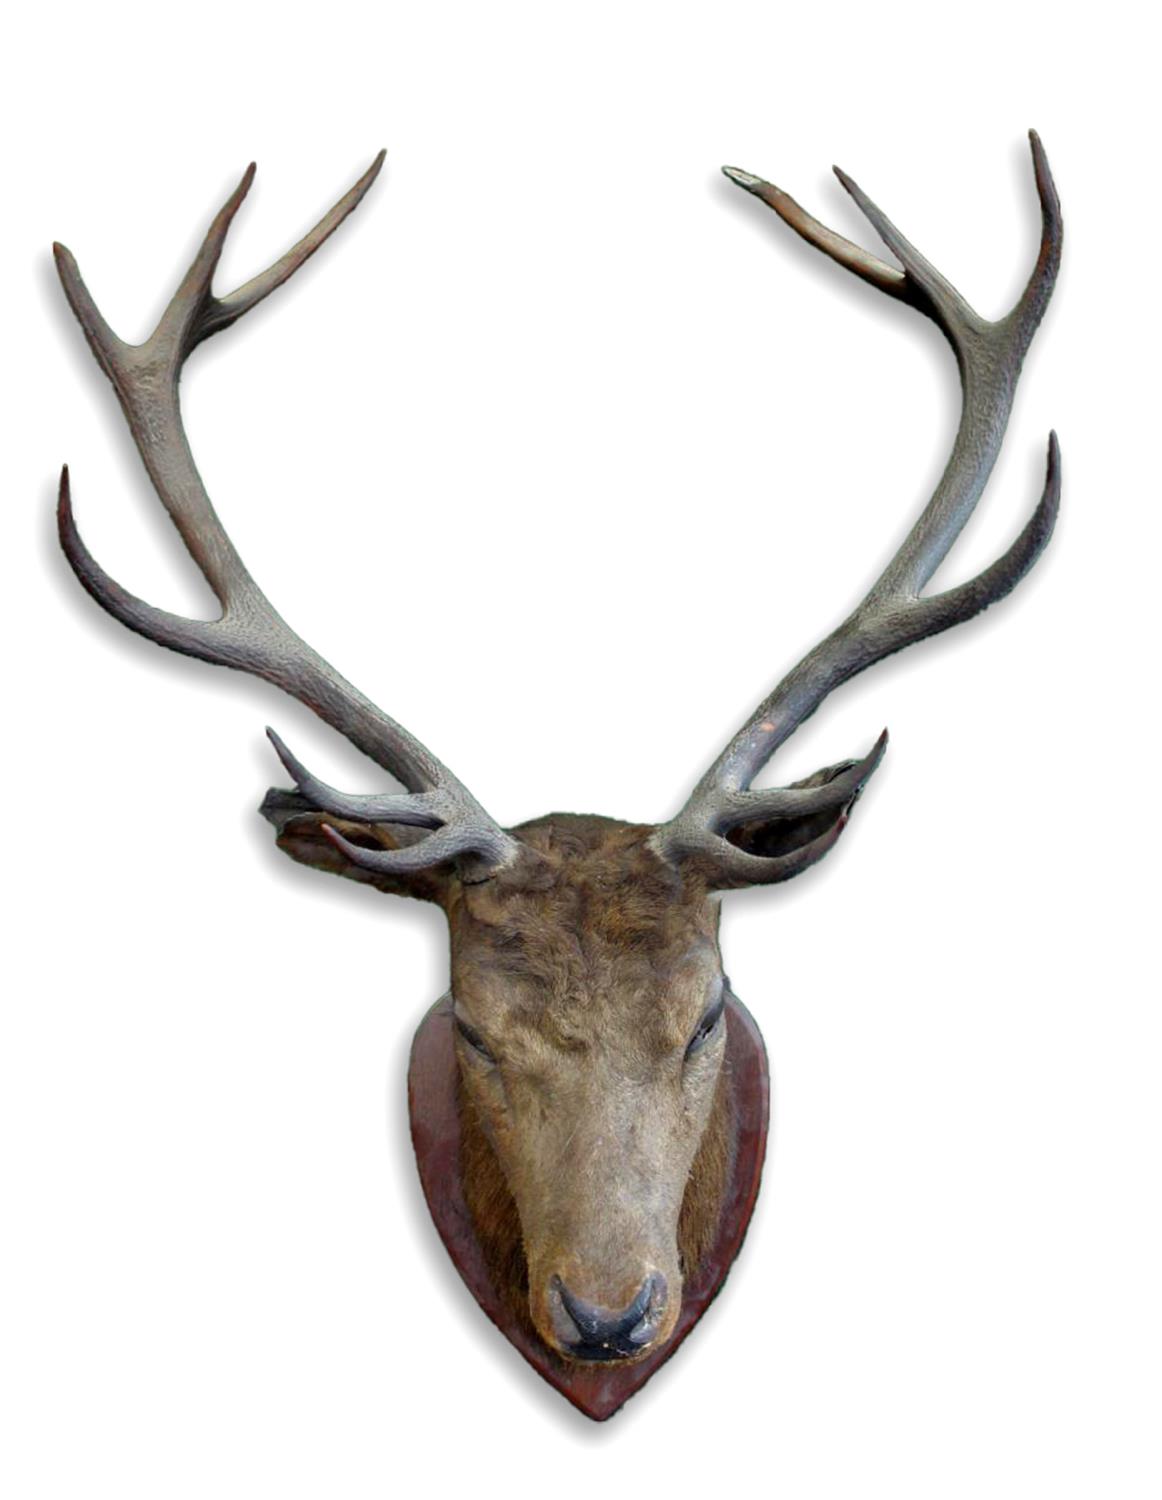 MOUNTED STAGS HEAD a large 12 point Stags head, mounted on an oak shield. *This has been in the